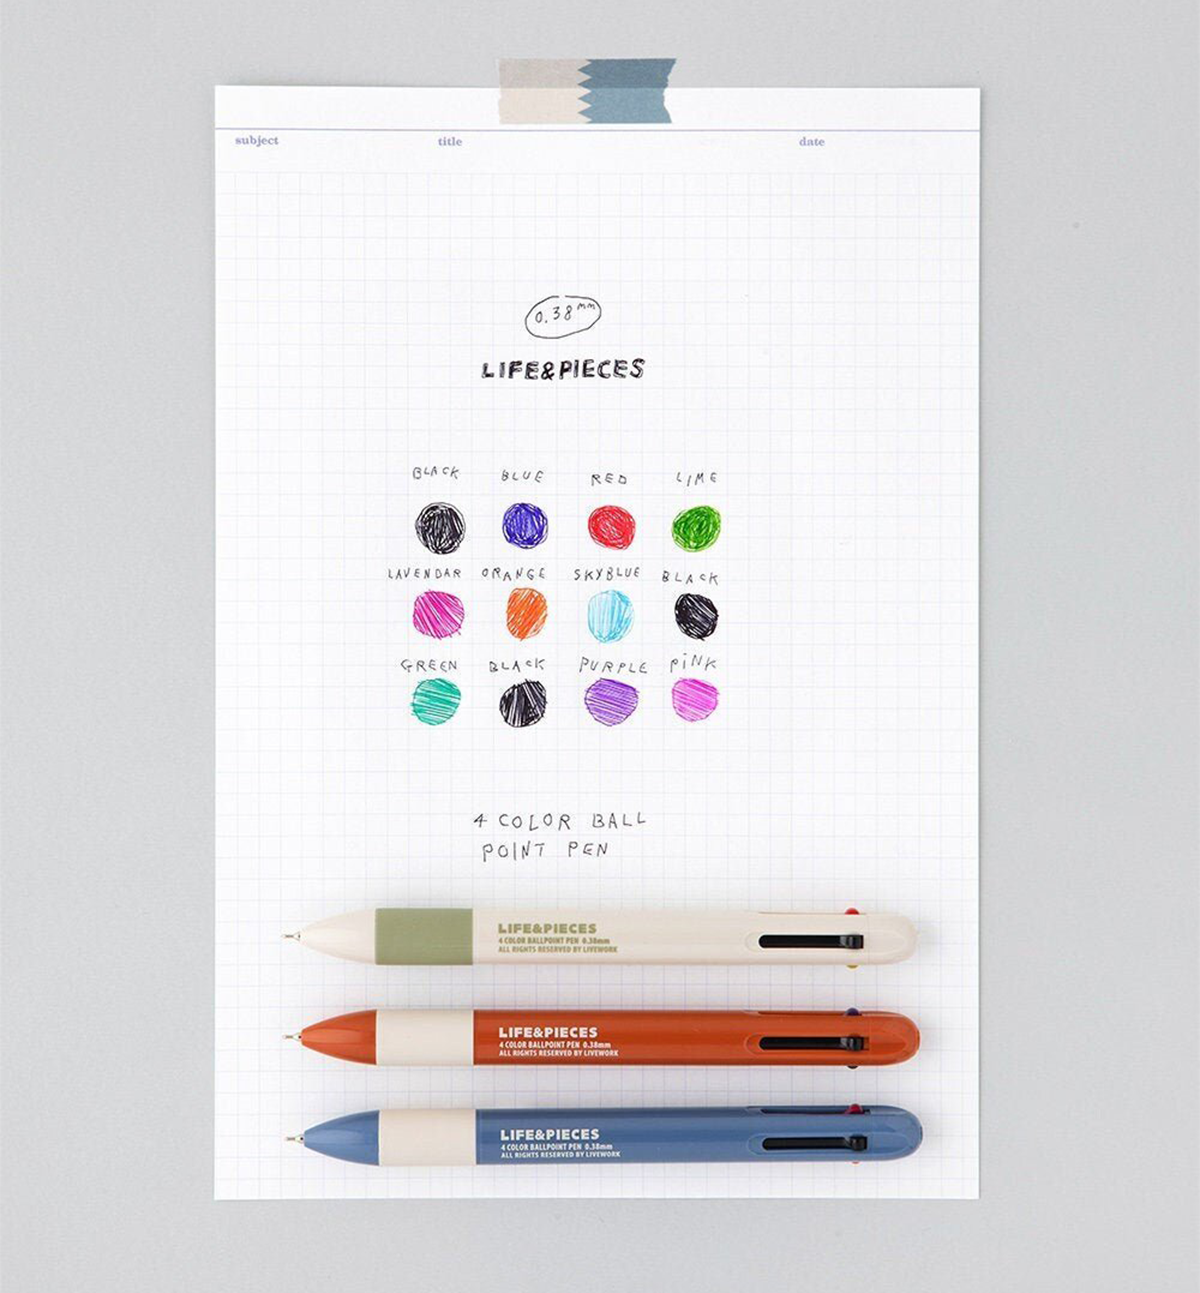 4 Colors Ballpoint Pen [Life and Pieces]